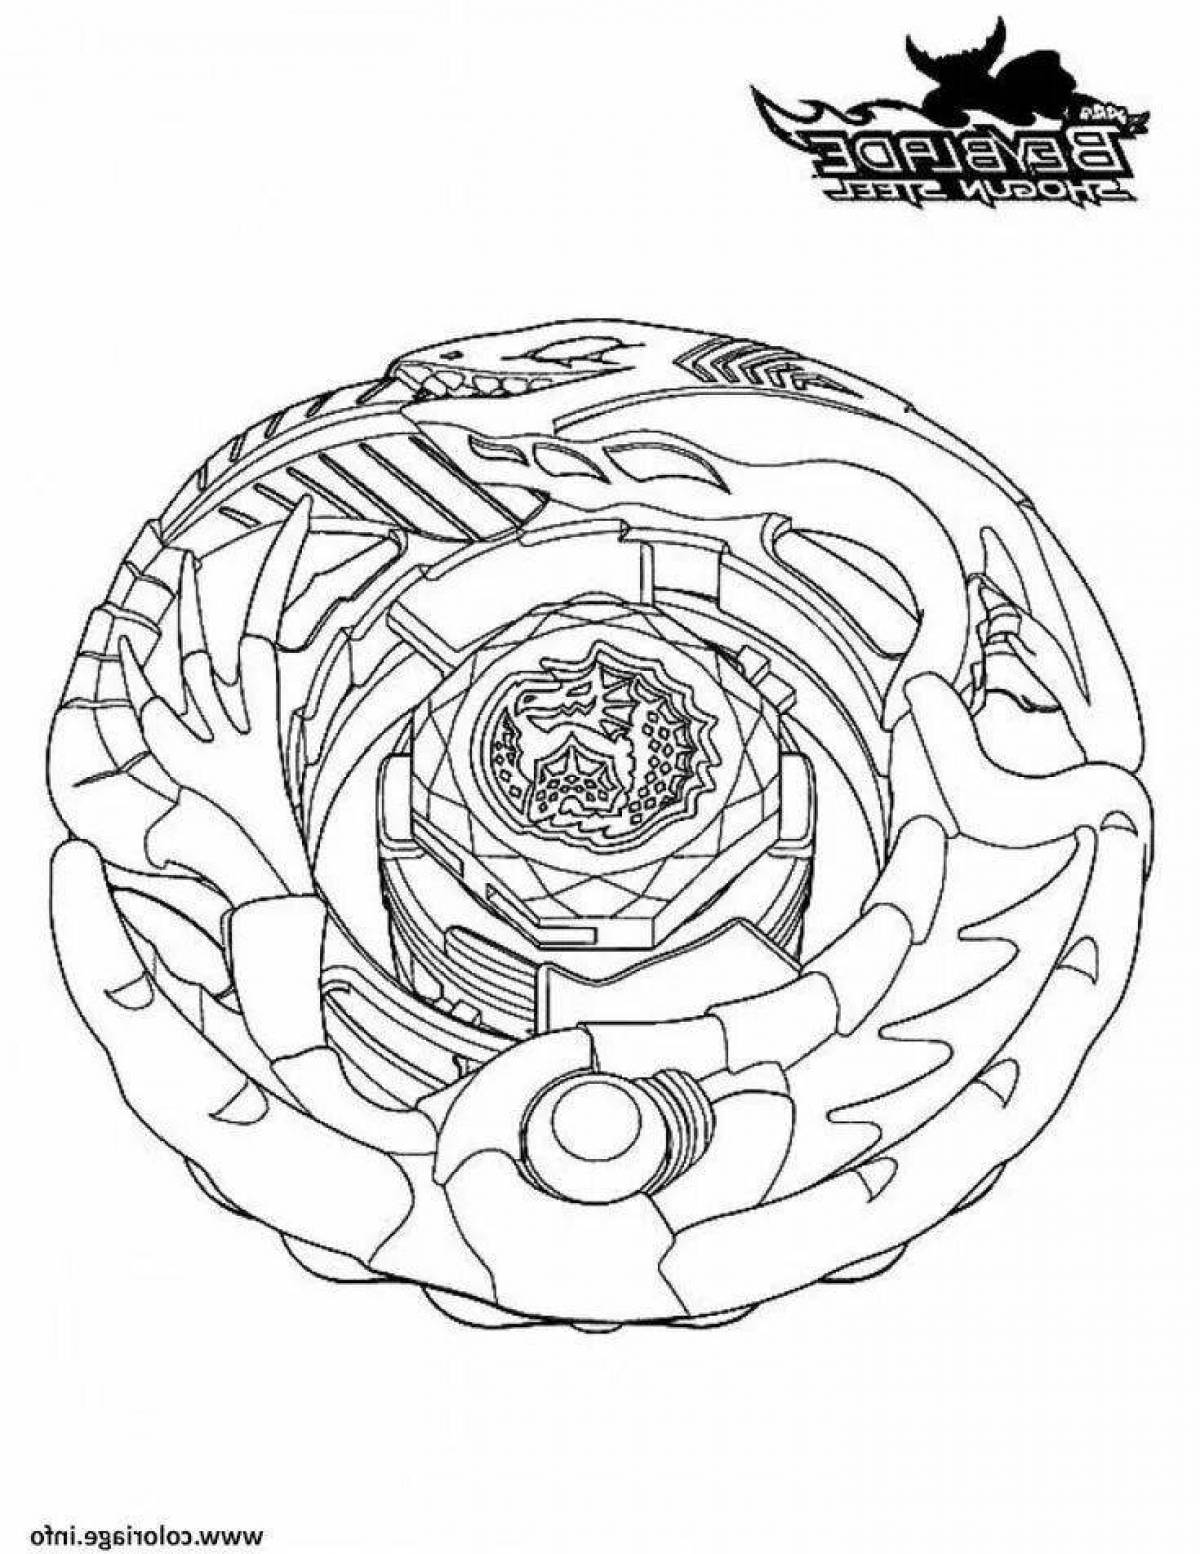 Playful beyblade coloring page